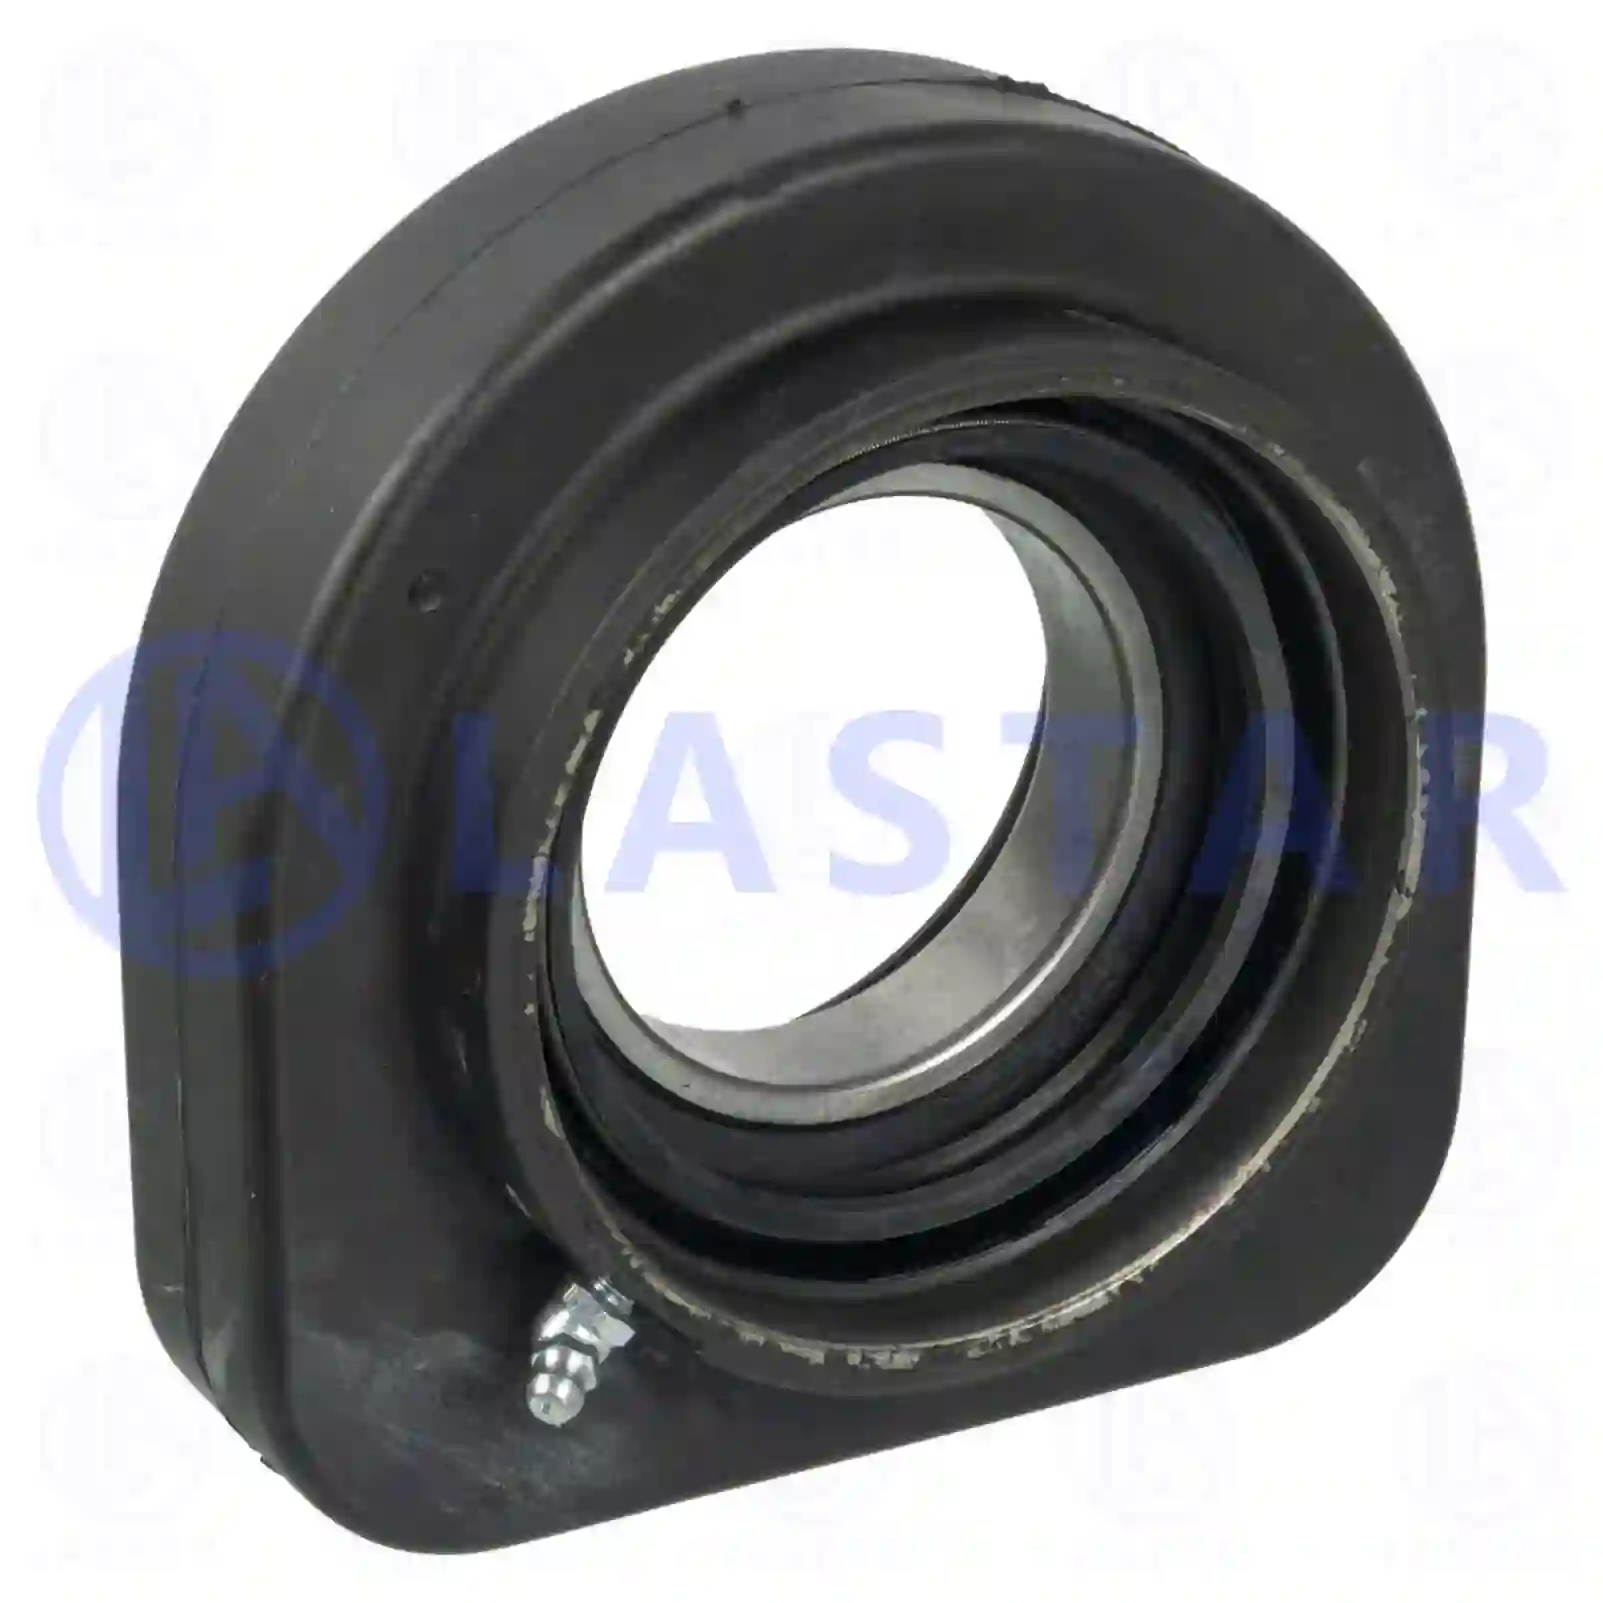 Center bearing, 77734213, 263567, 8171366 ||  77734213 Lastar Spare Part | Truck Spare Parts, Auotomotive Spare Parts Center bearing, 77734213, 263567, 8171366 ||  77734213 Lastar Spare Part | Truck Spare Parts, Auotomotive Spare Parts